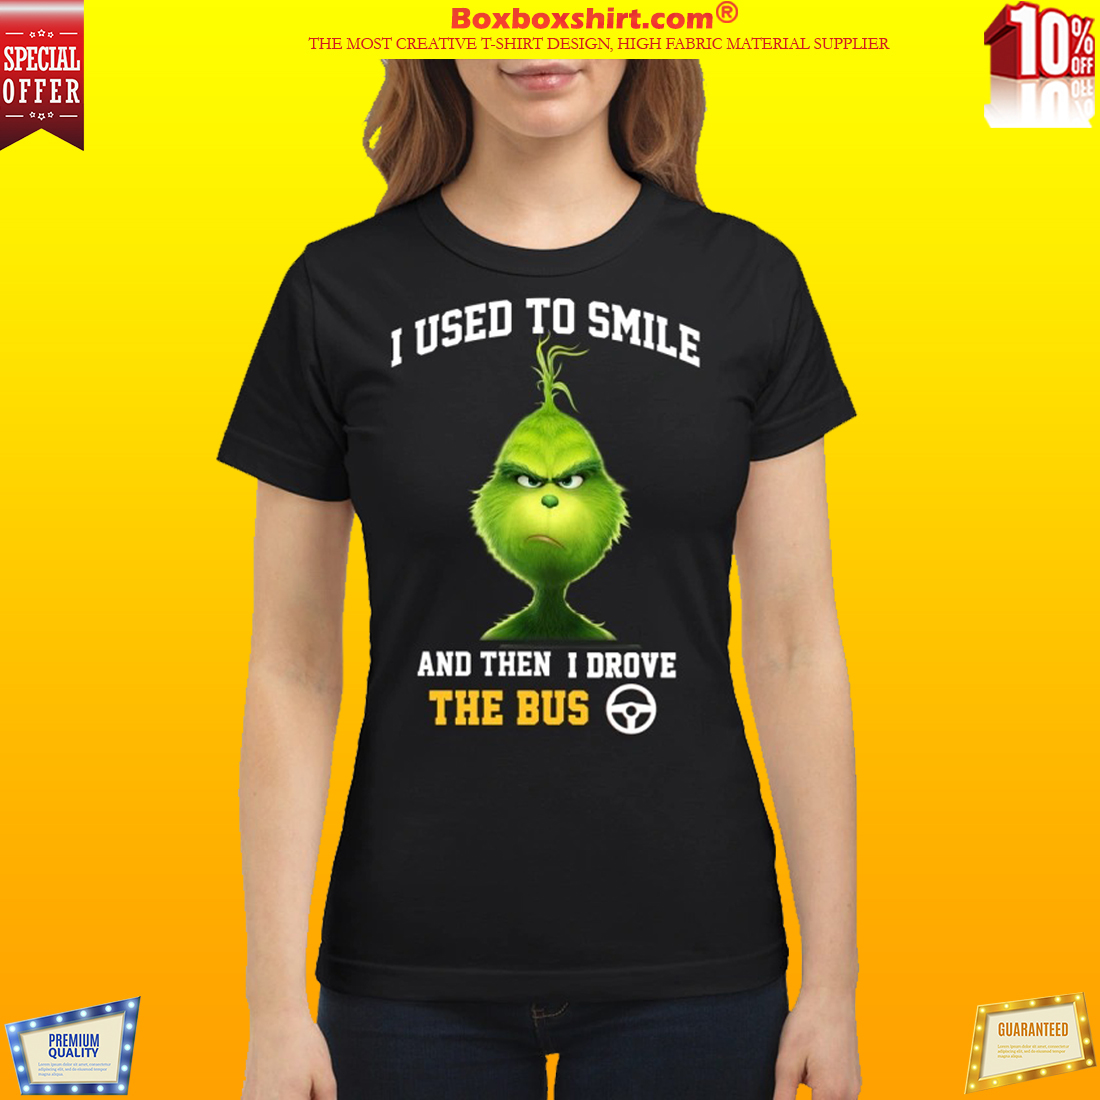 Grinch I used to smile and then drove the bus classic shirt